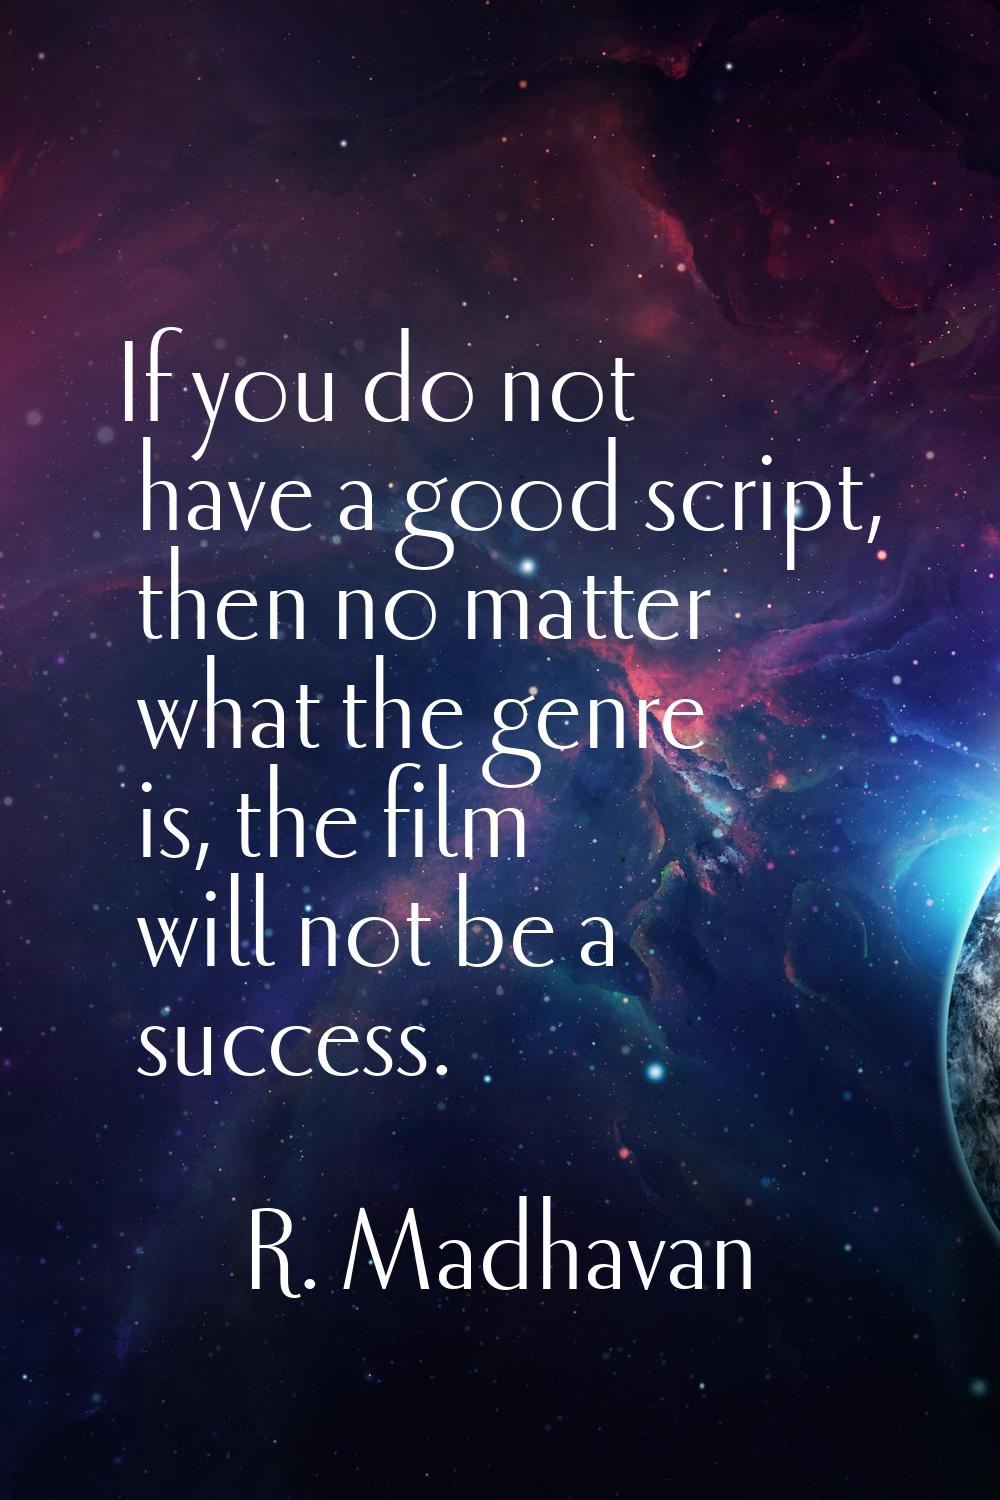 If you do not have a good script, then no matter what the genre is, the film will not be a success.